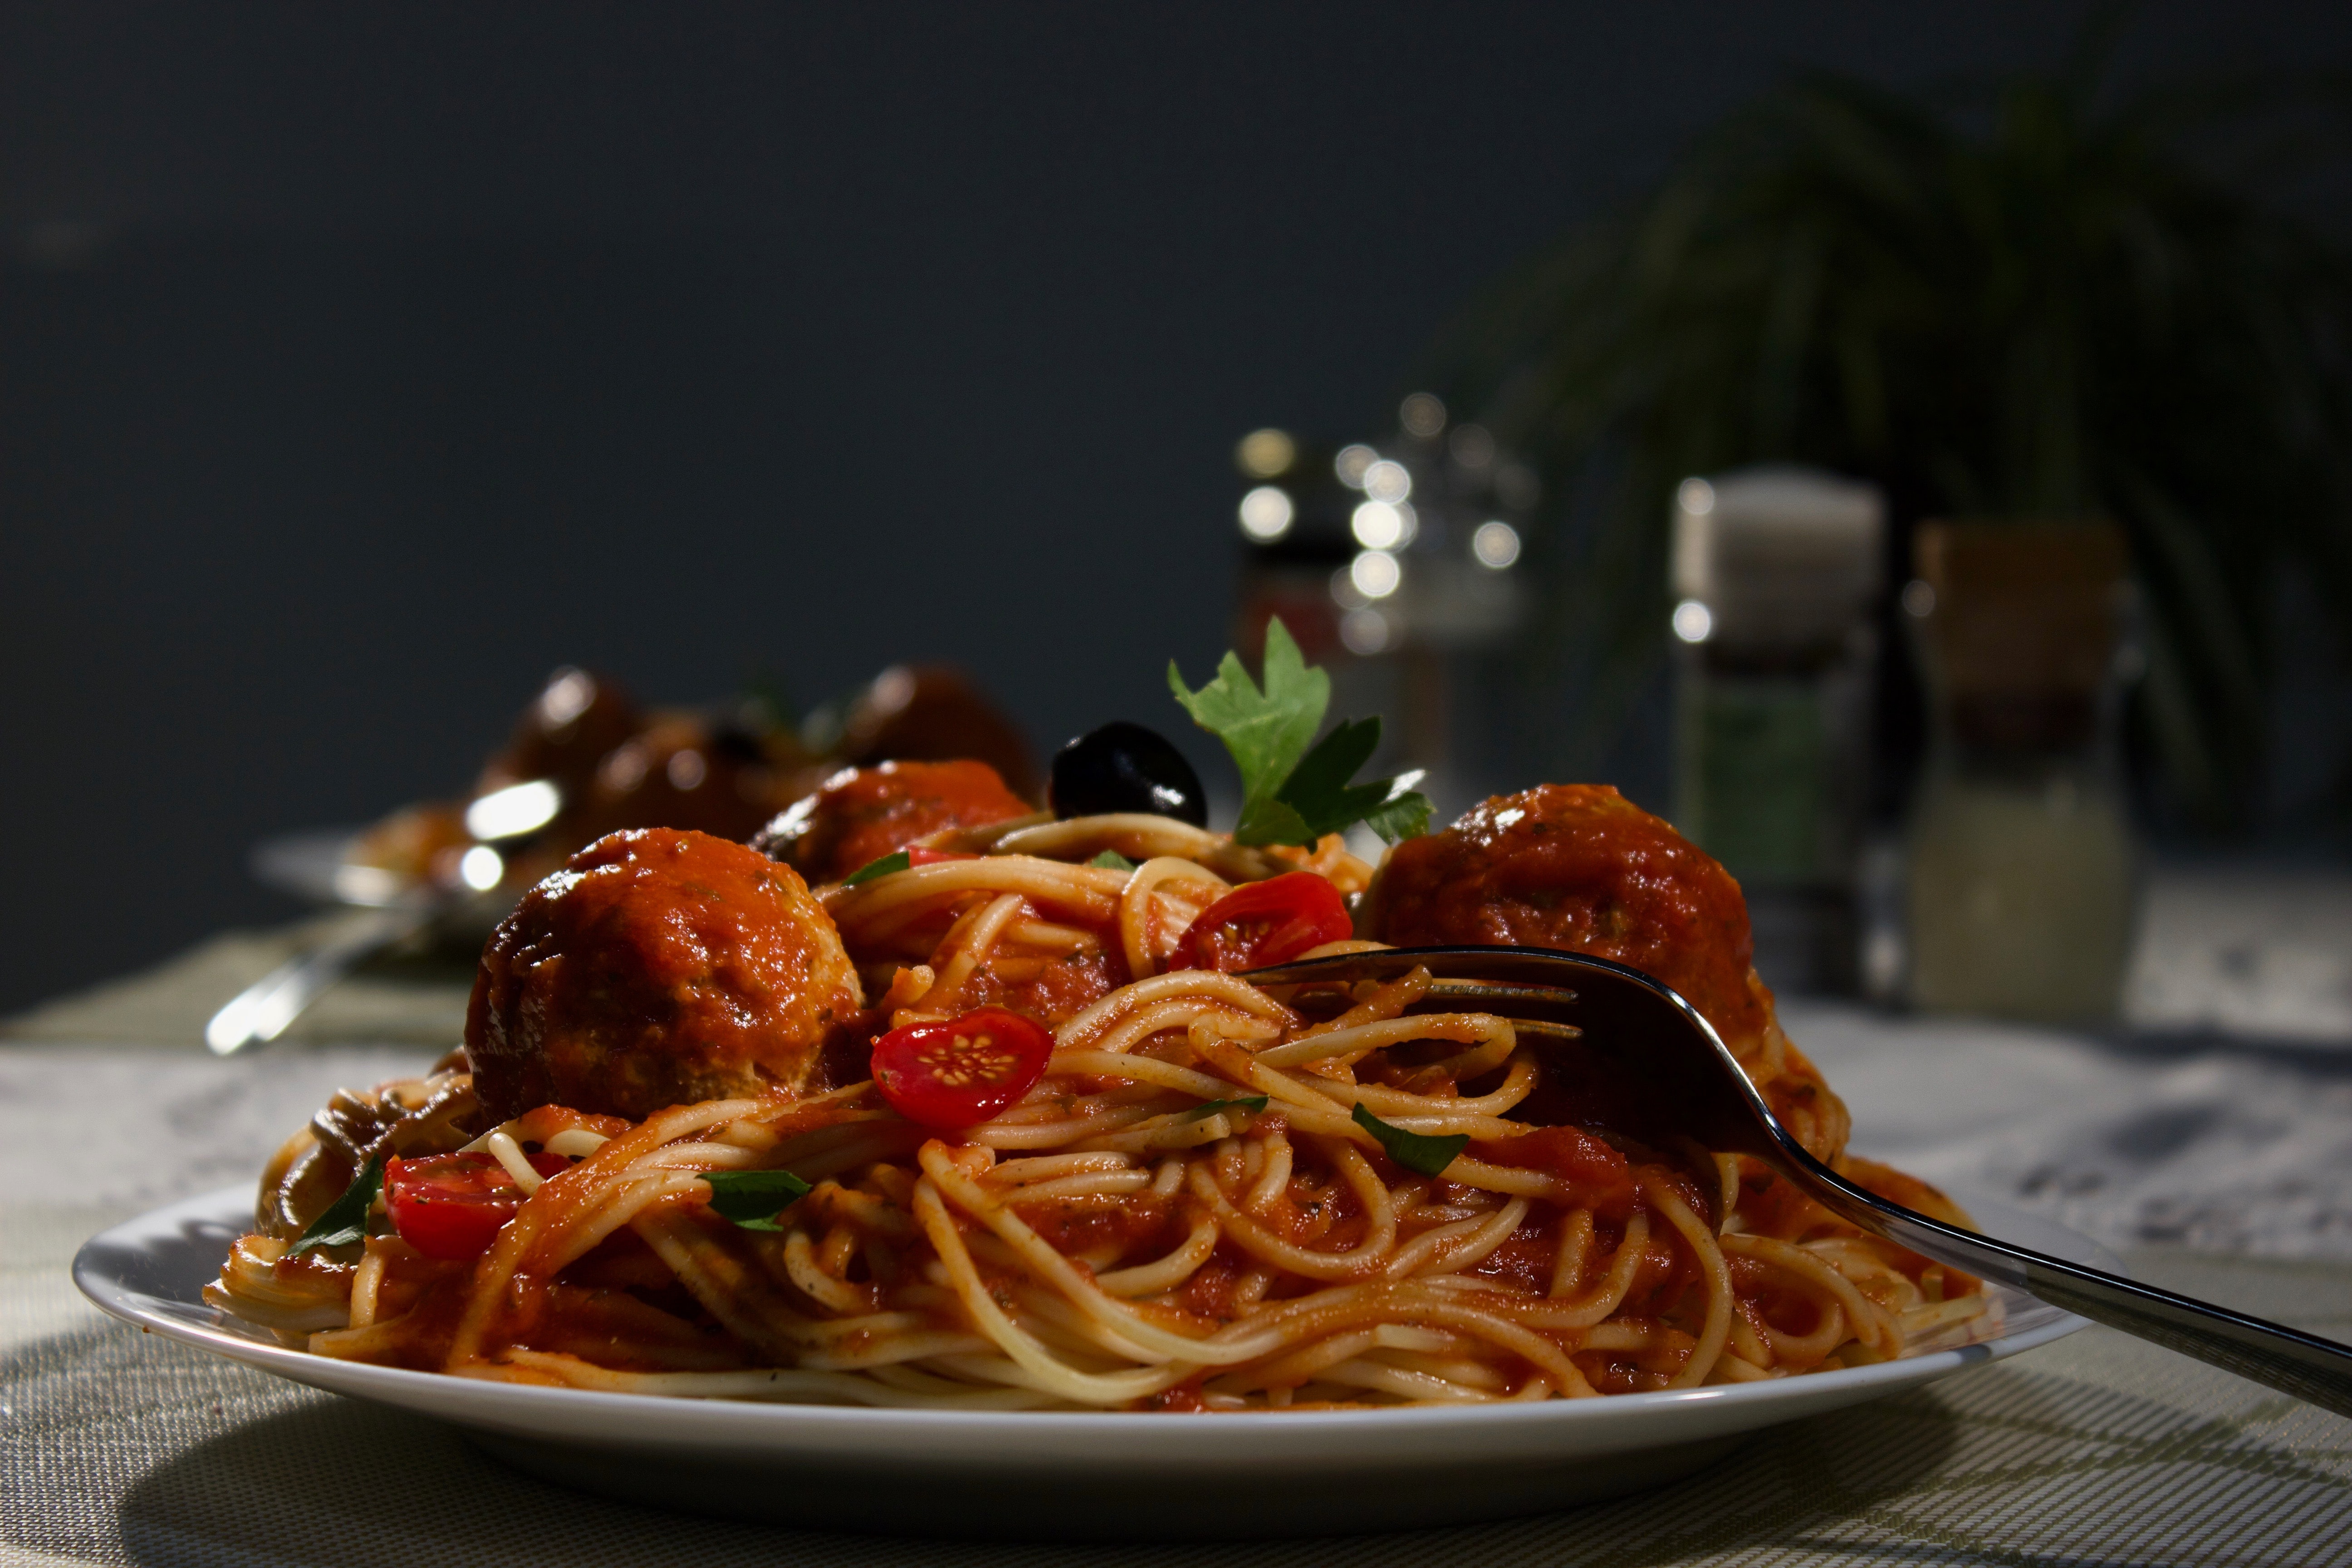 A plate of spaghetti with meatballs.